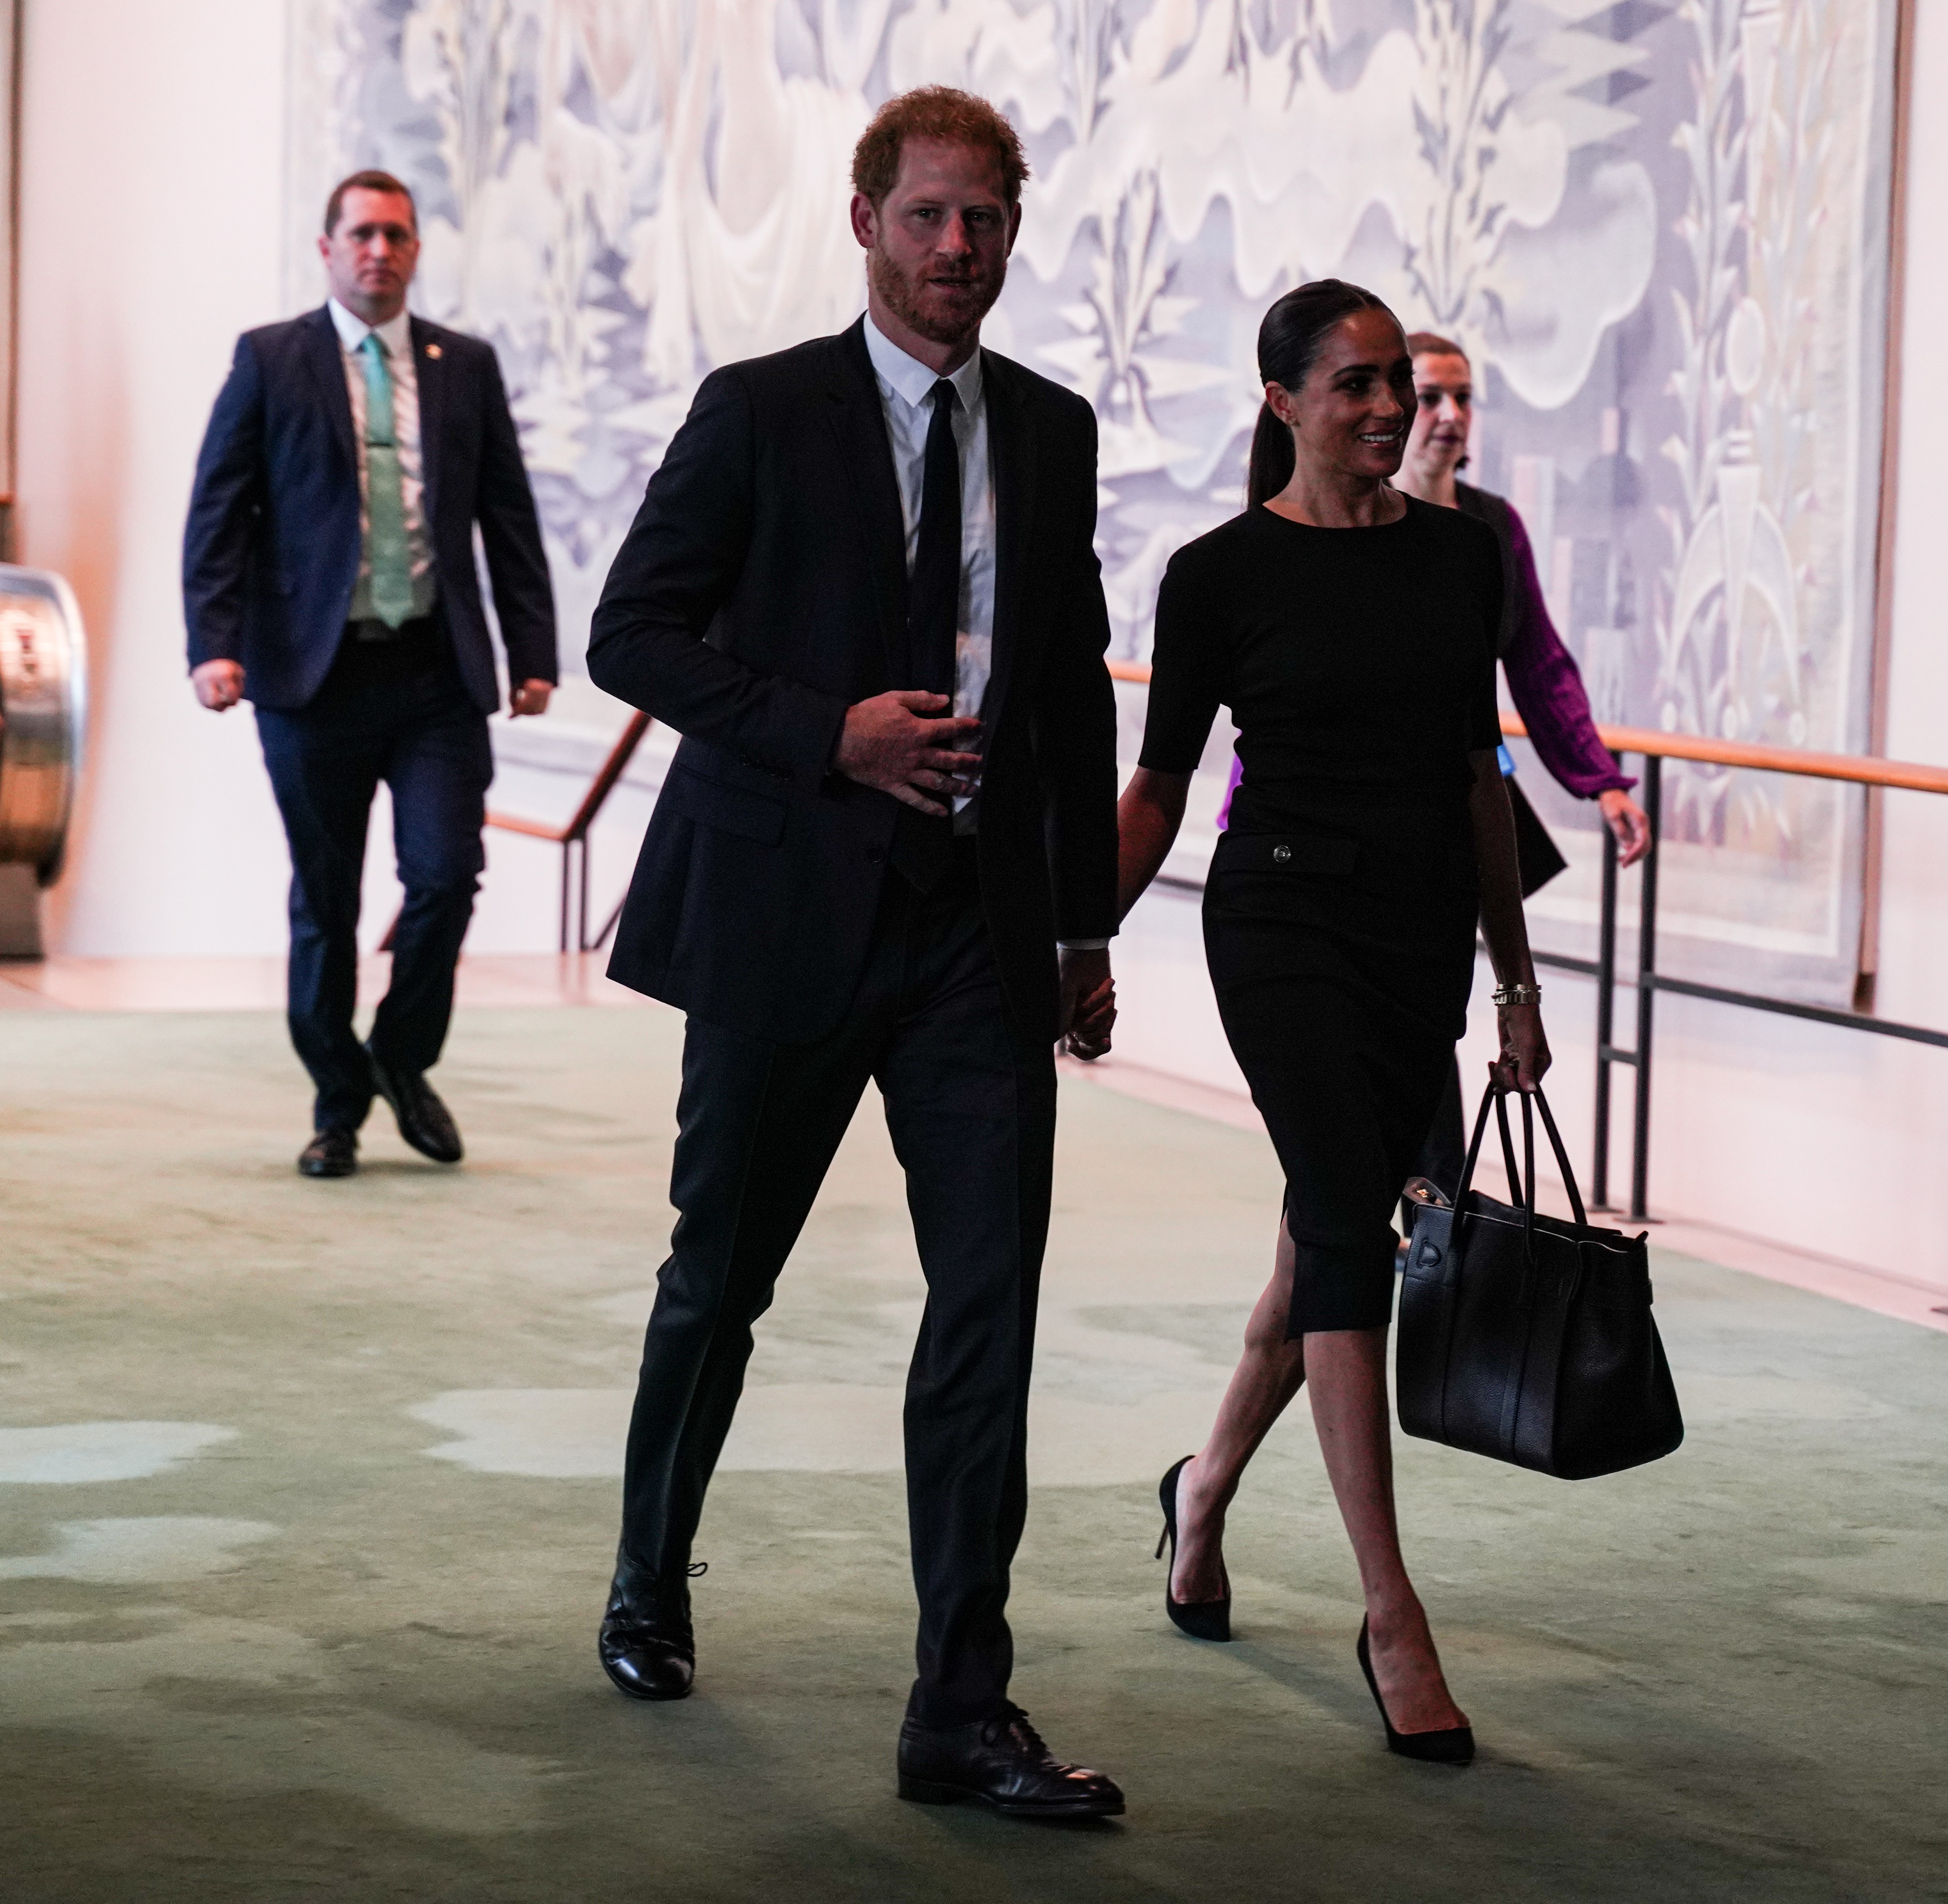 NEW YORK, UNITED STATED - JULY 18: Britain's Prince Harry and his wife Meghan, Duchess of Sussex, arrive to celebrate Nelson Mandela International Day at the United Nations Headquarters in New York, U.S. July 18, 2022. (Photo by Lokman Vural Elibol/Anadol (Foto: Anadolu Agency via Getty Images)